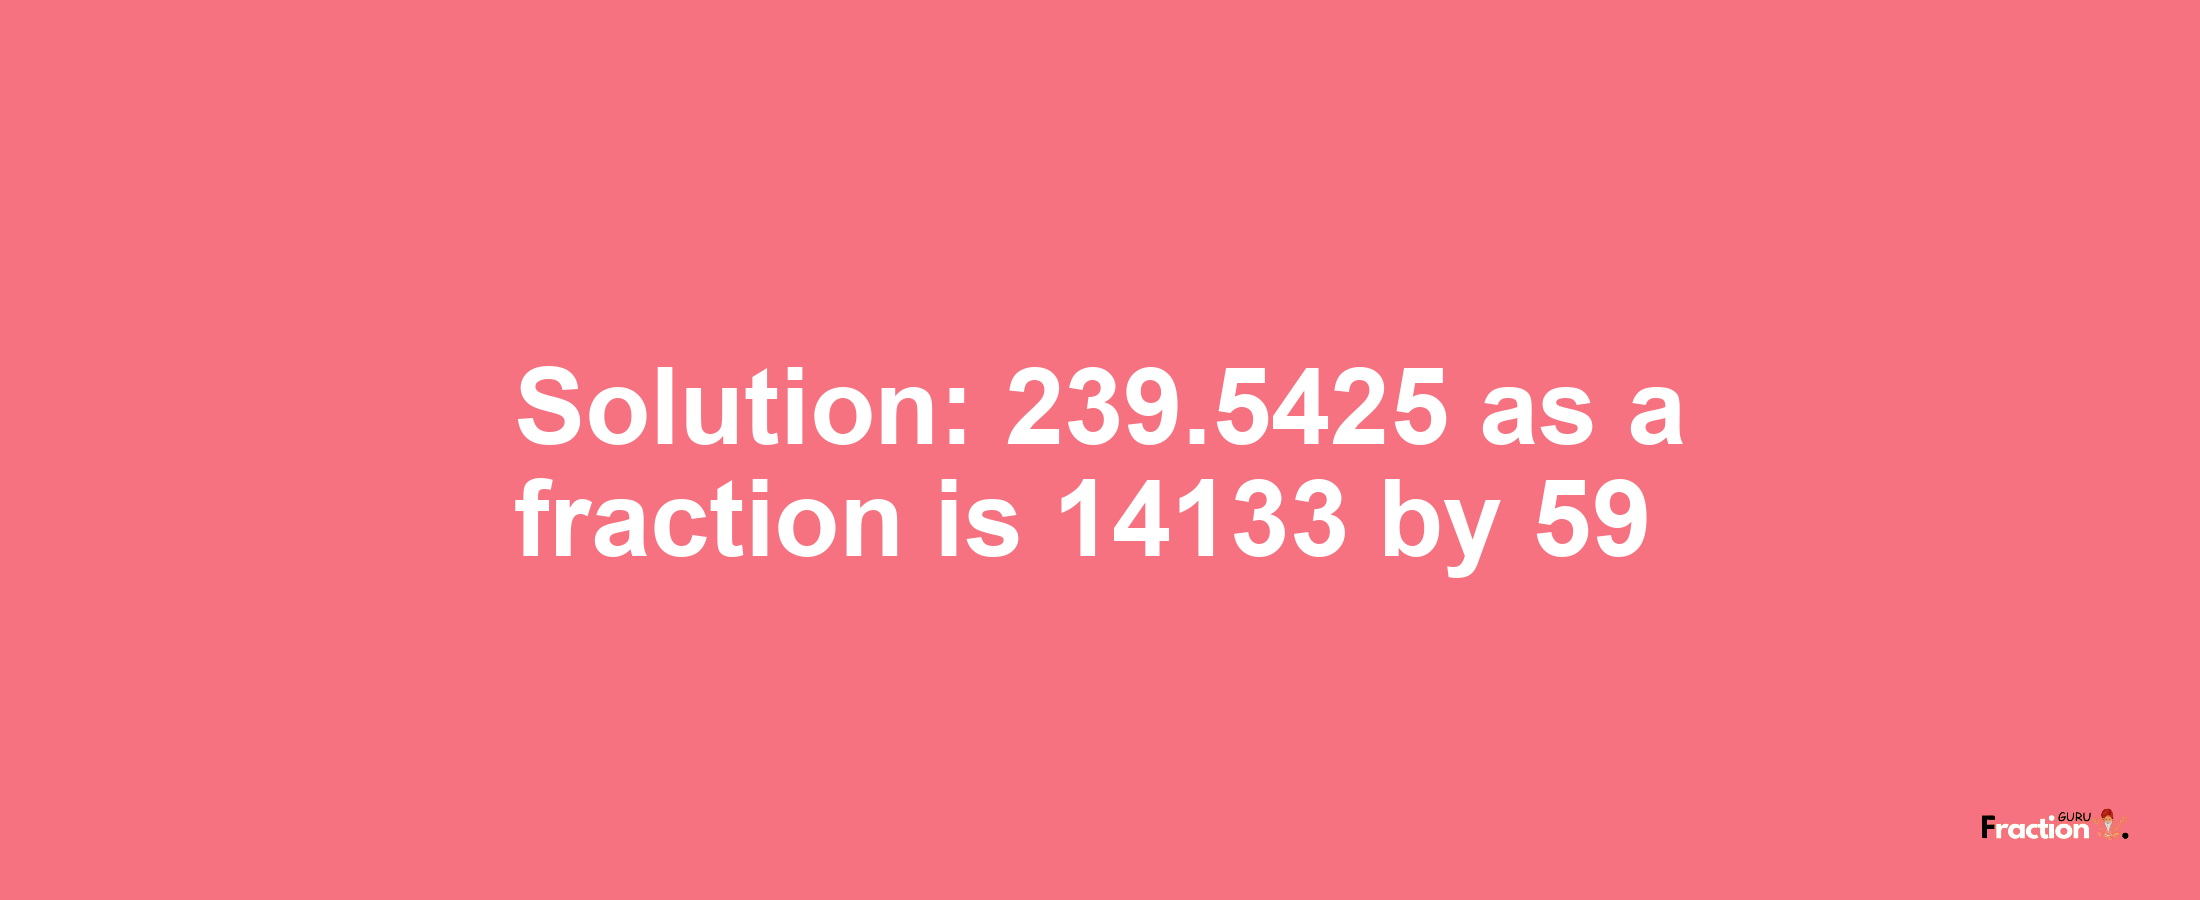 Solution:239.5425 as a fraction is 14133/59